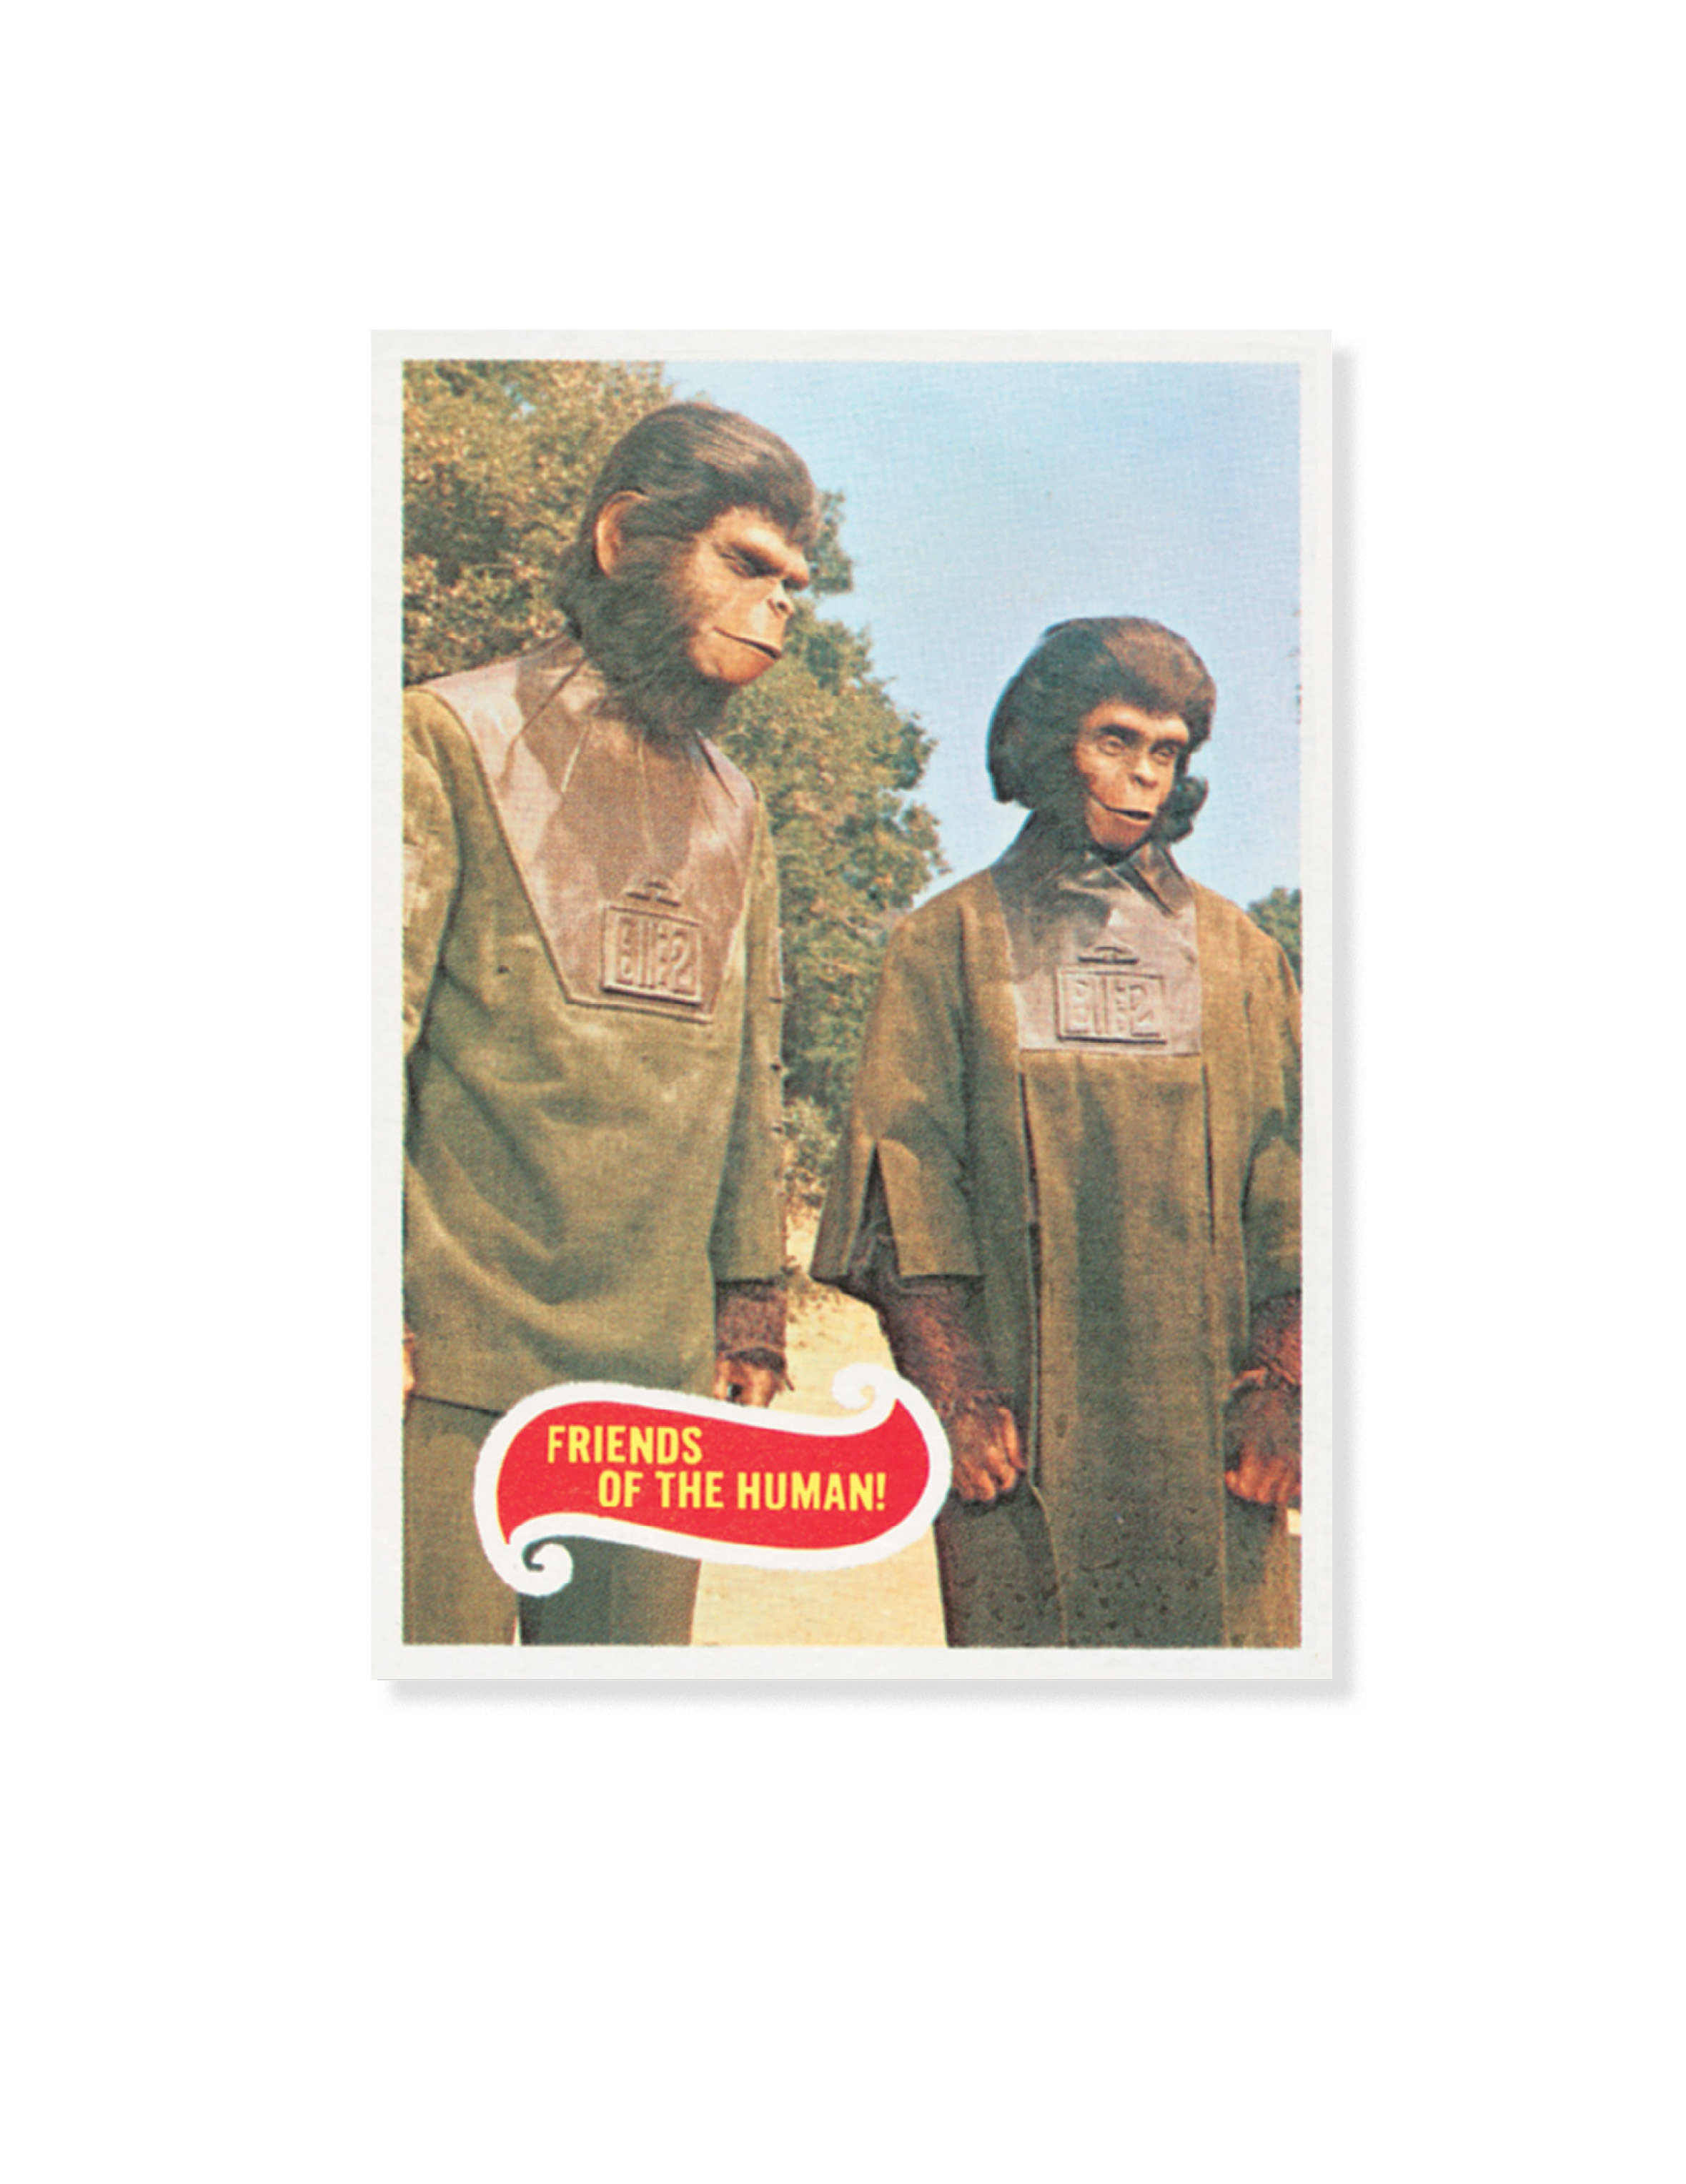 Read online Planet of the Apes: The Original Topps Trading Card Series comic -  Issue # TPB (Part 2) - 6